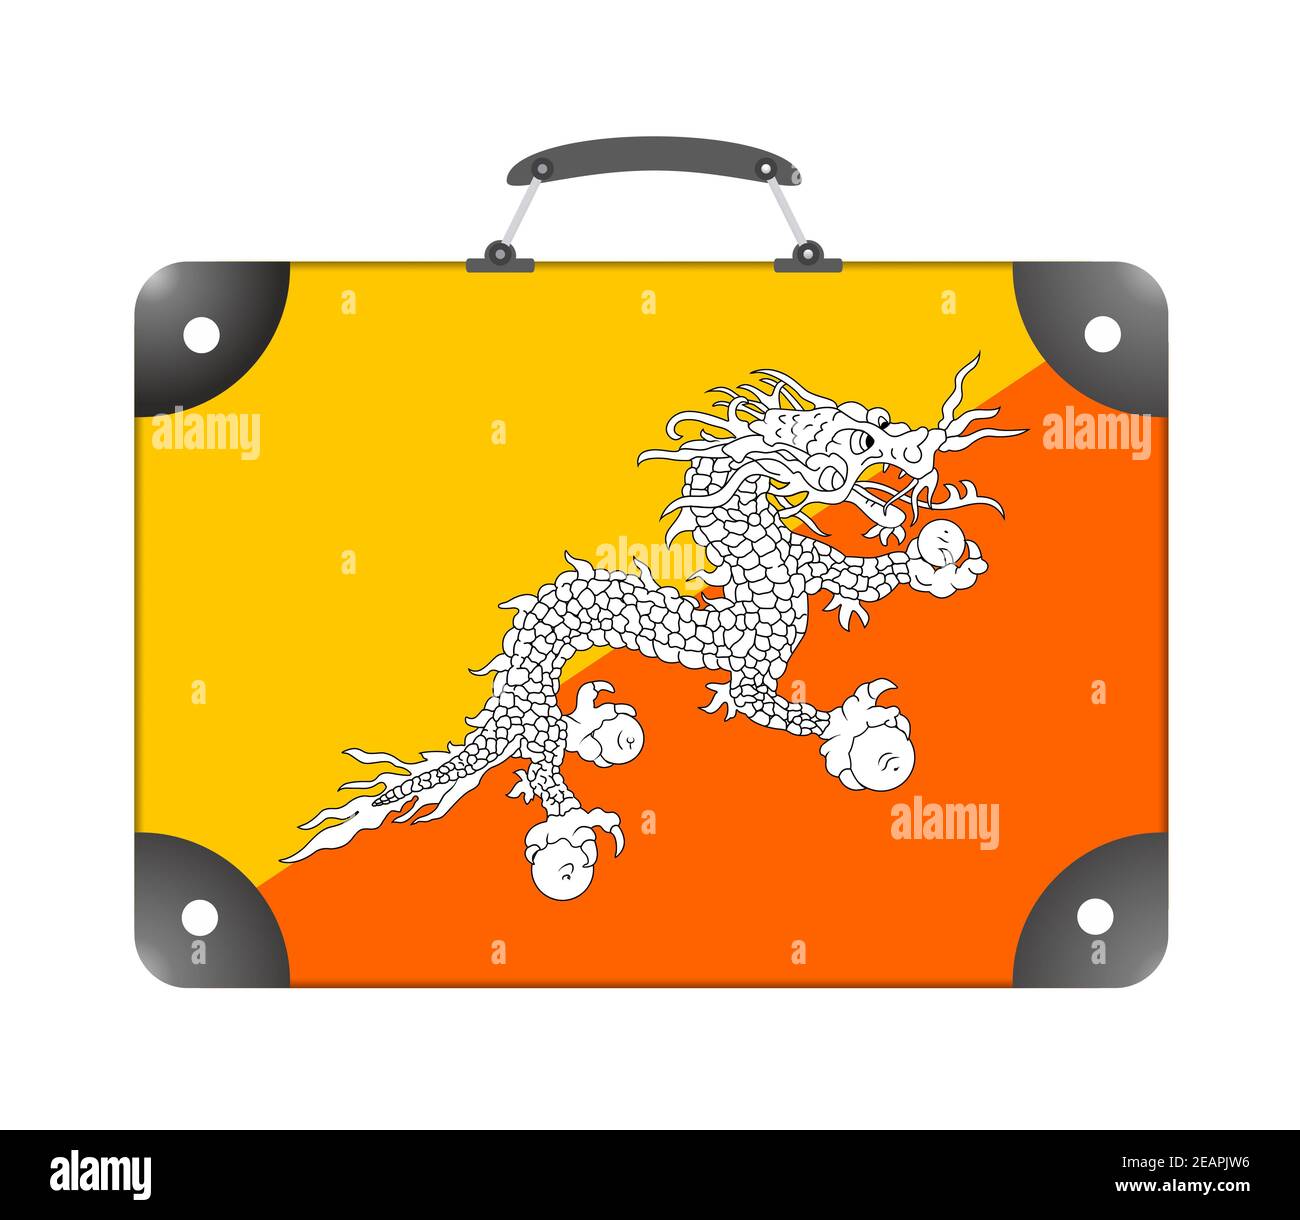 Bhutan country flag in the form of a travel suitcase on a white background Stock Photo